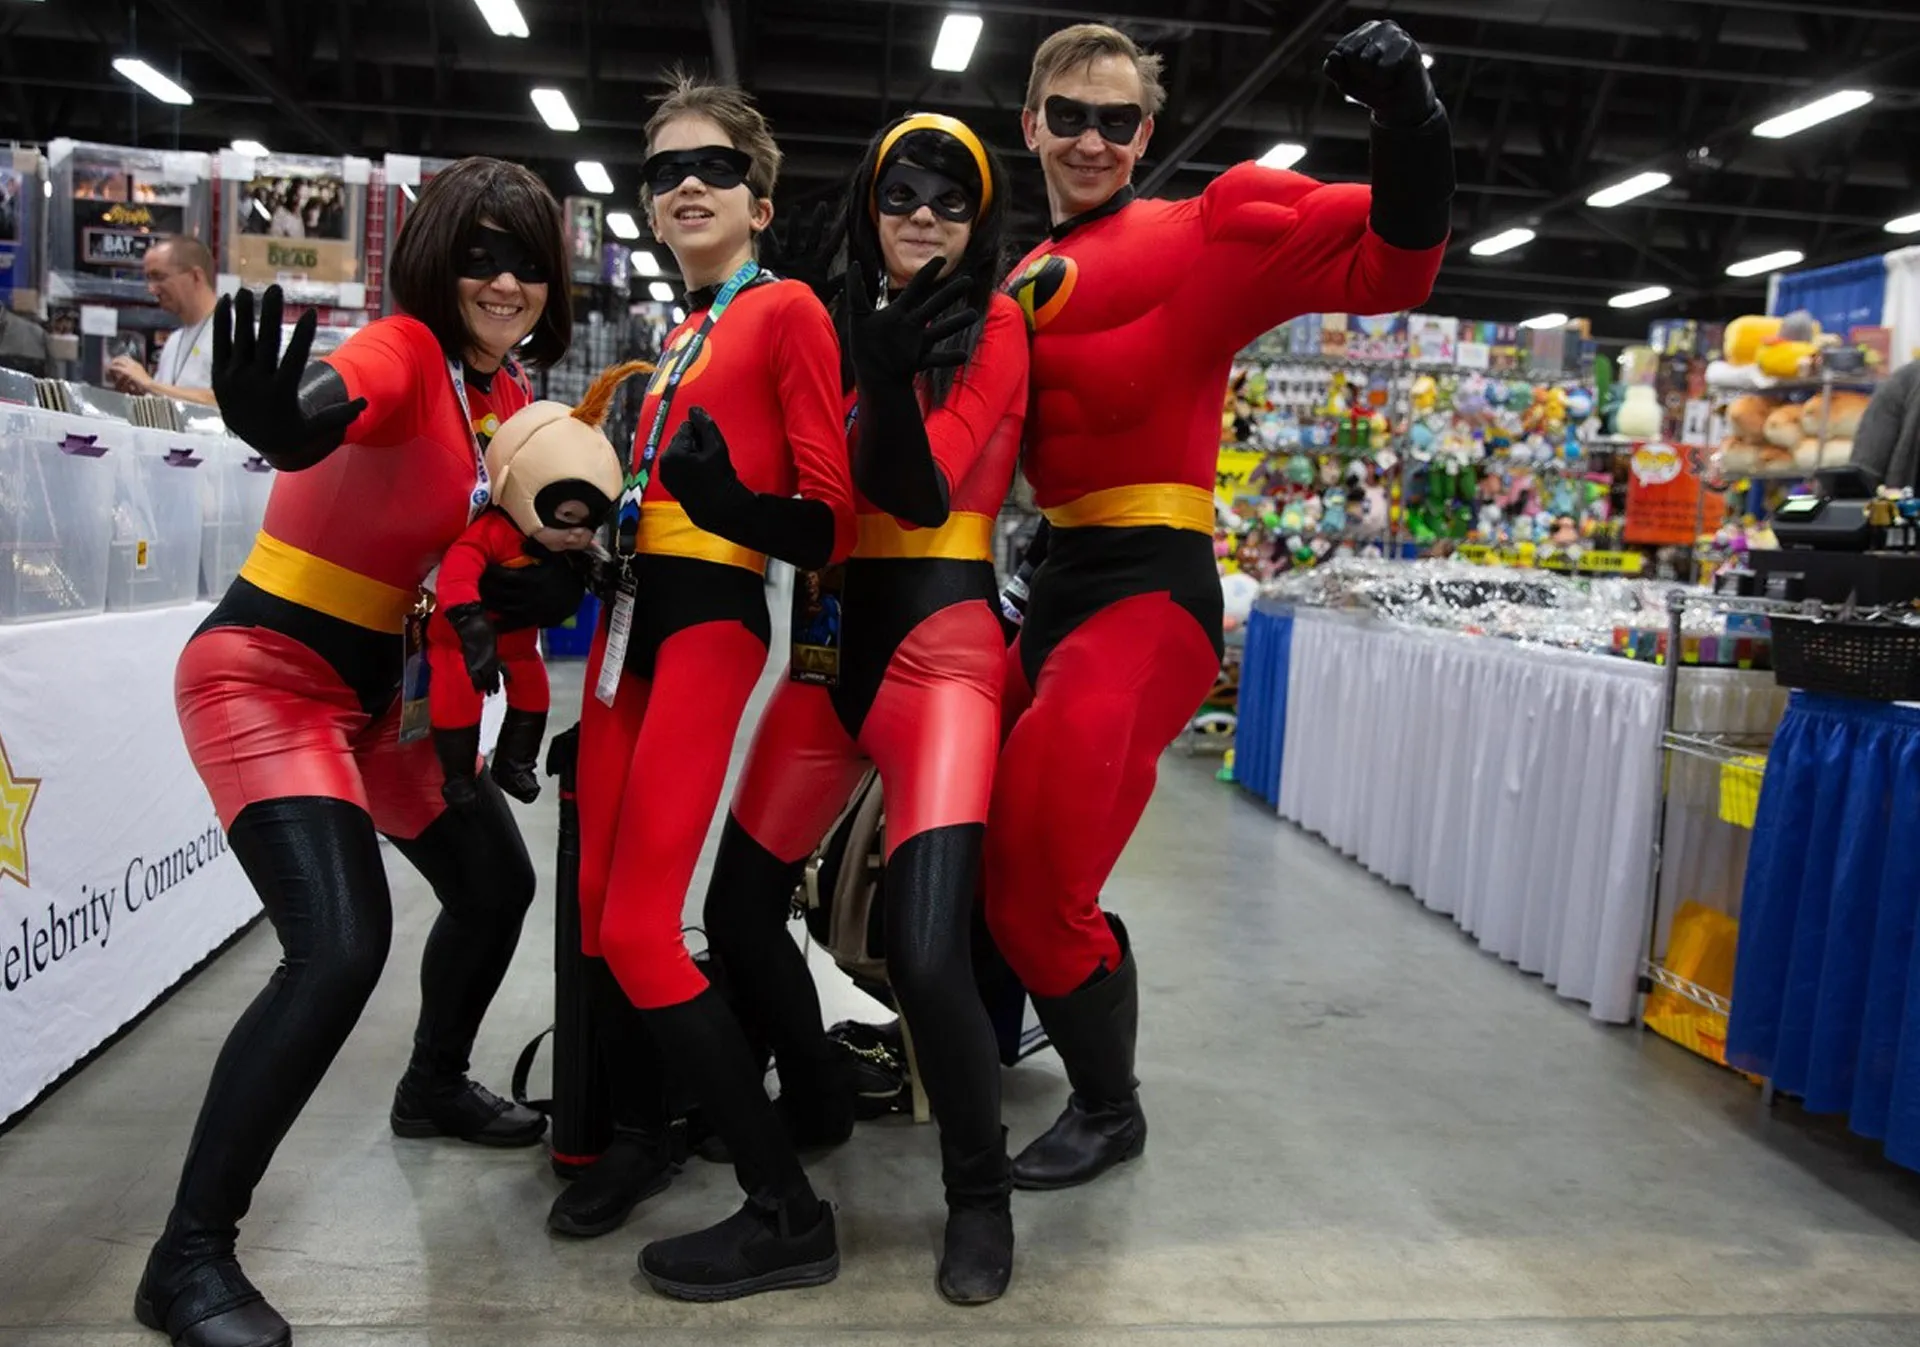 Calgary Comic &amp; Entertainment Expo is a family friendly event.